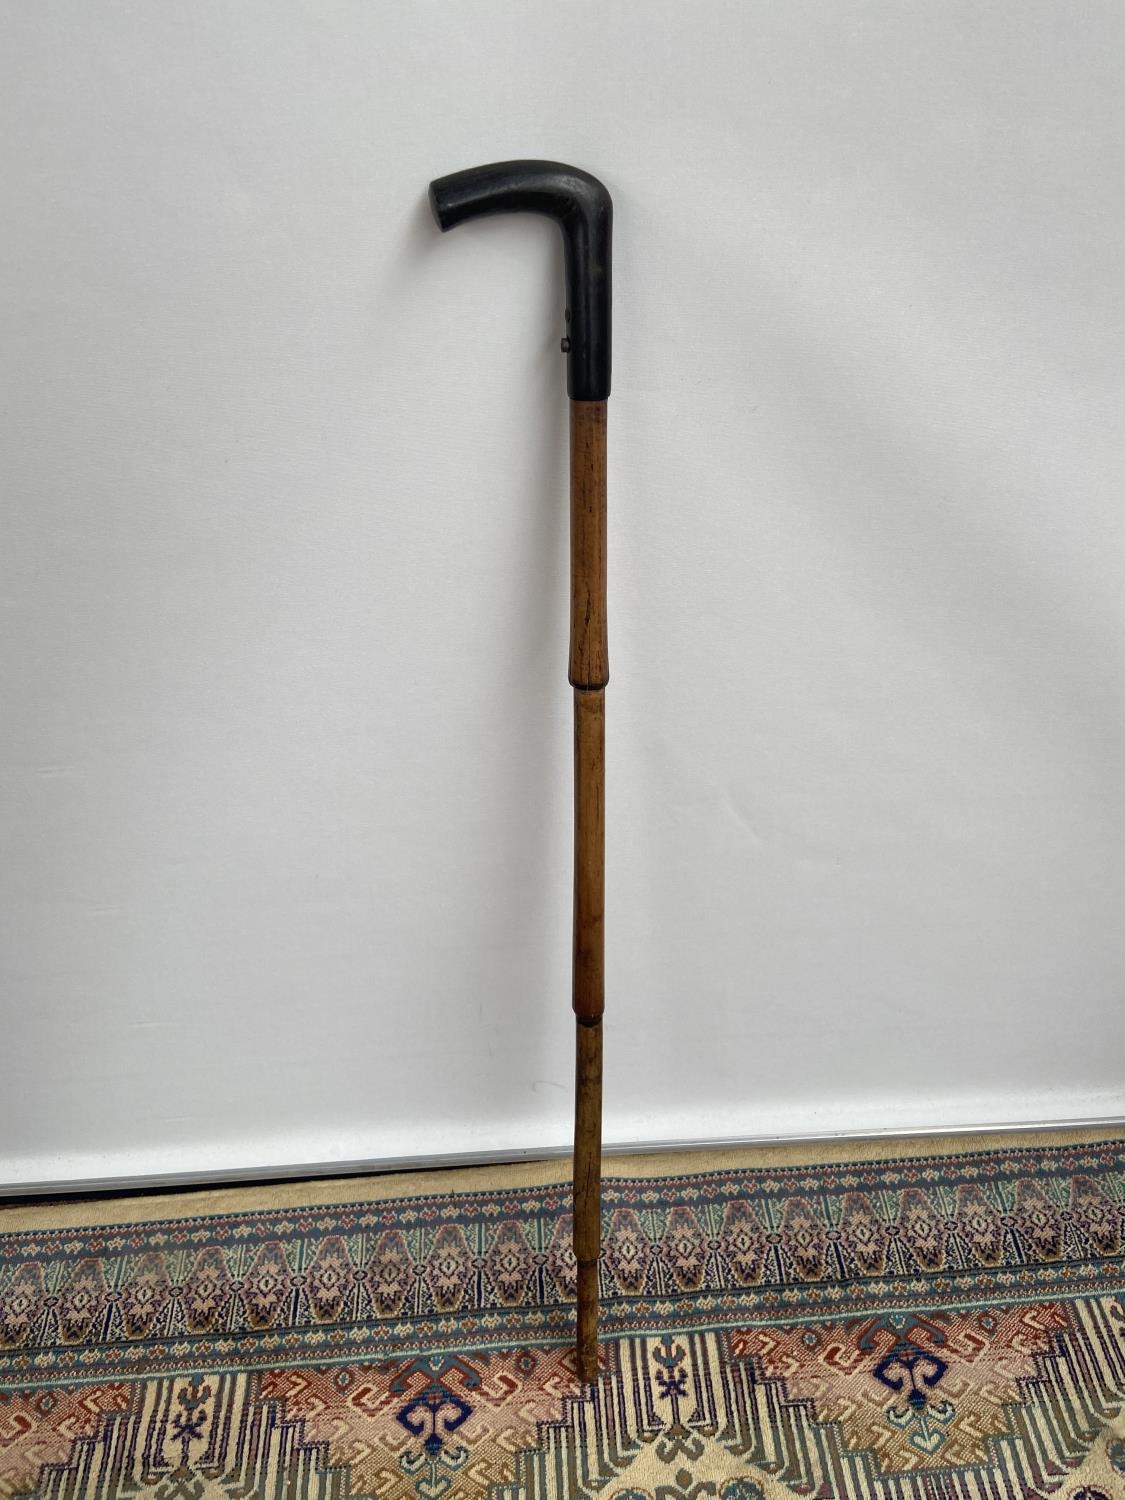 An antique walking cane pistol, designed with a bone handle and bamboo shaft [length, 90cm]